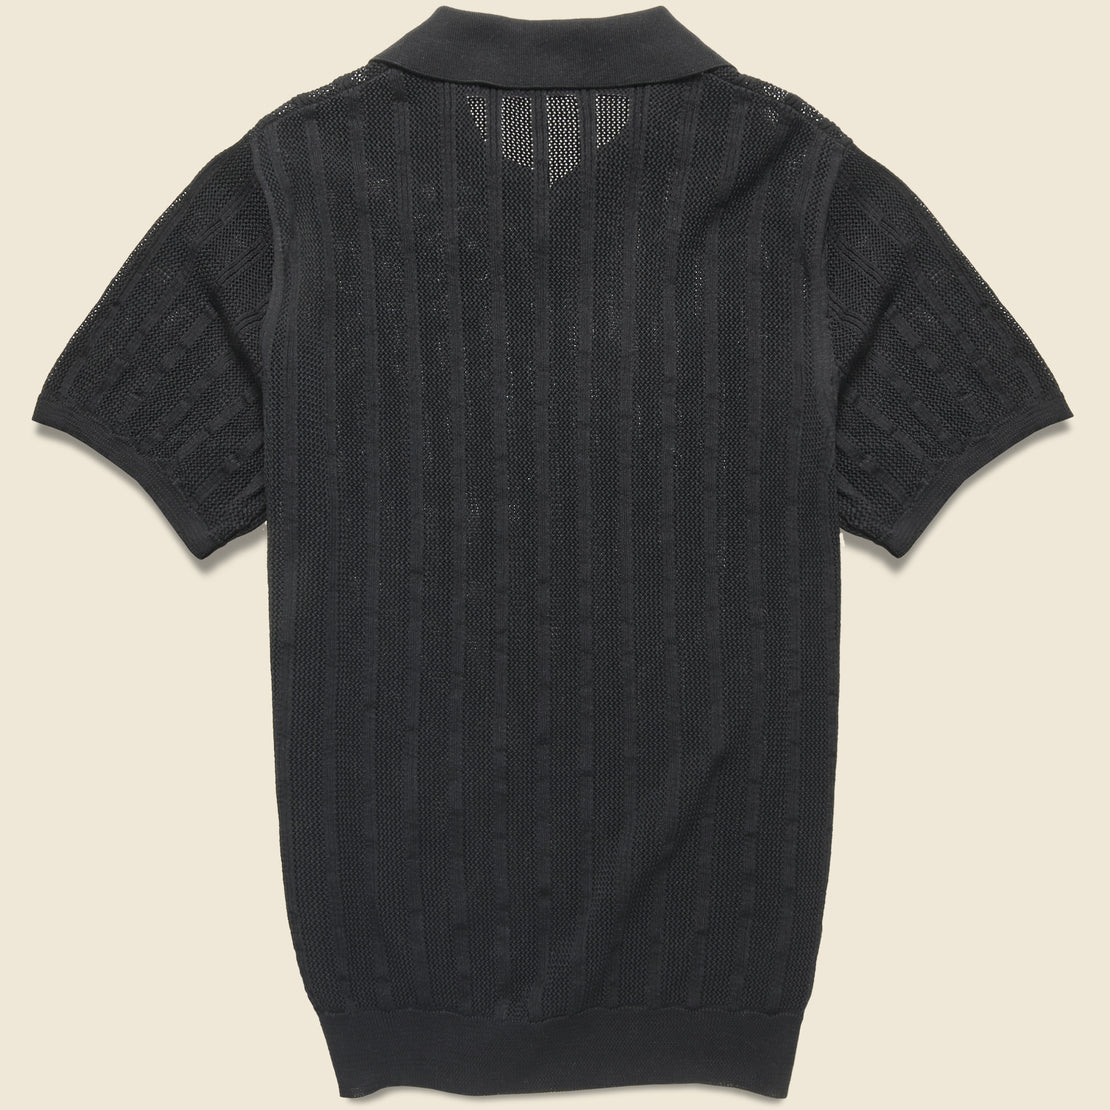 Garden Polo - Black - Knickerbocker - STAG Provisions - Tops - S/S Knit